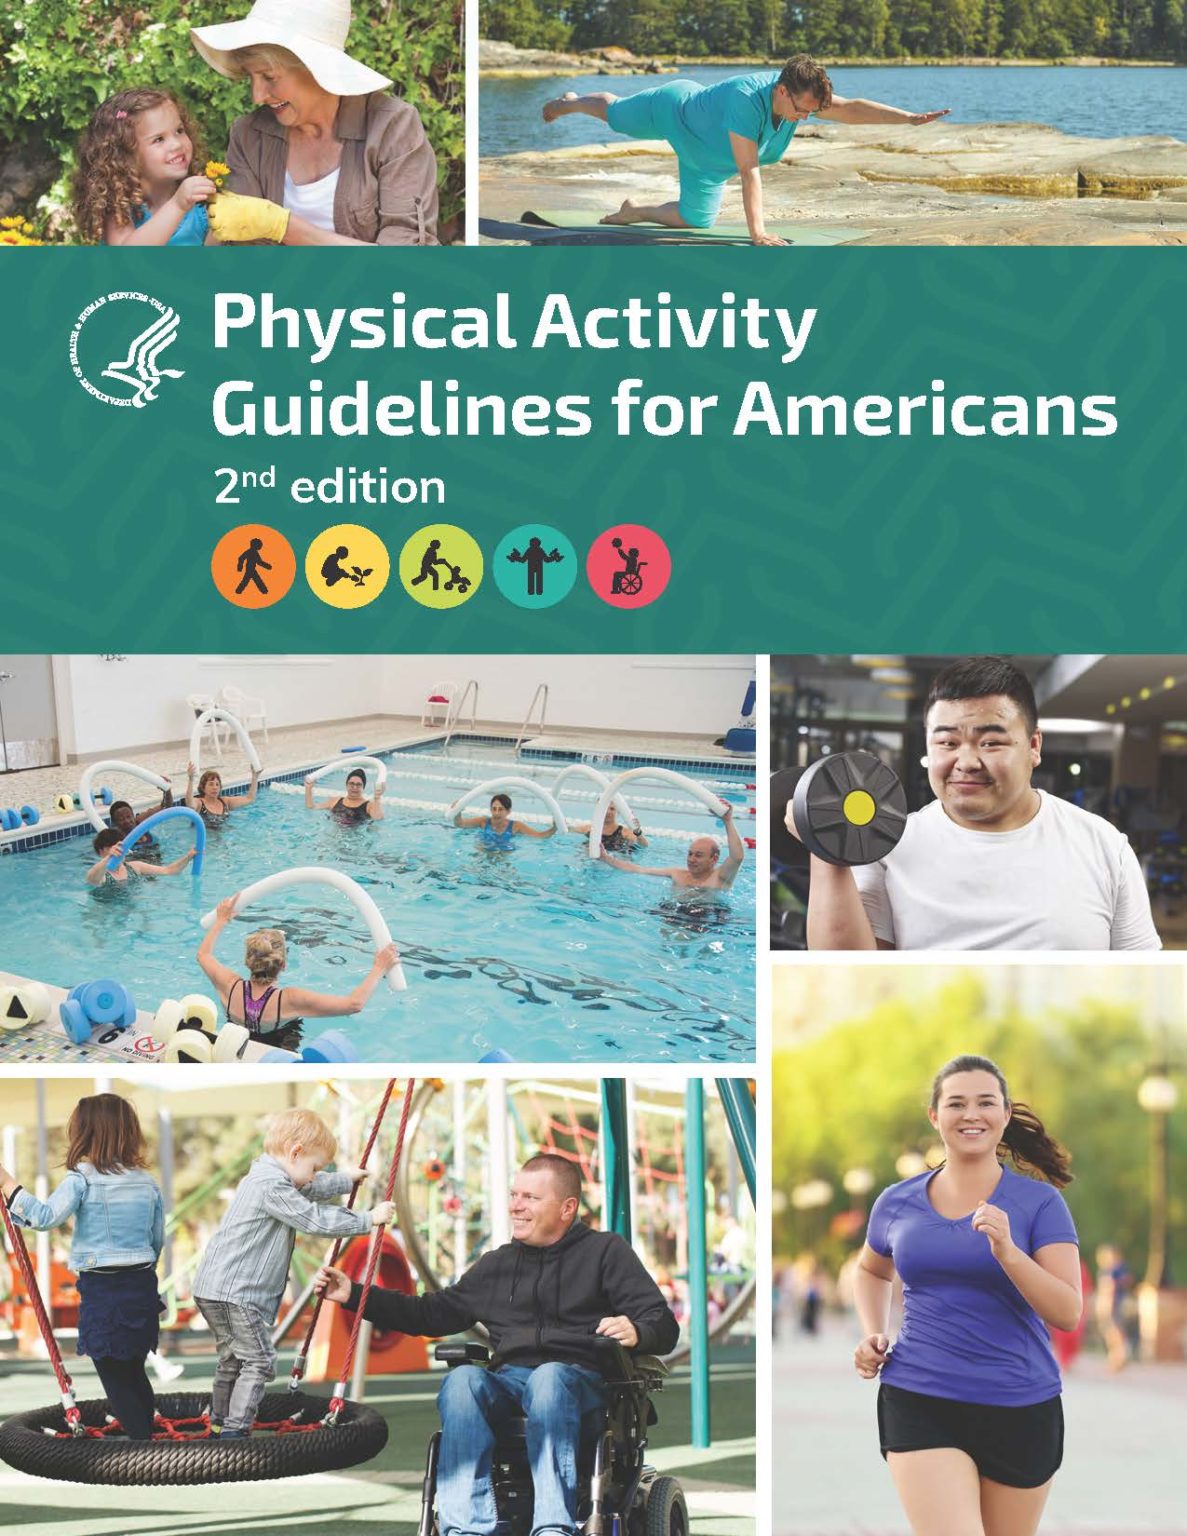 1st-page-physical-activity-guidelines-for-americans-2nd-edition-thrive